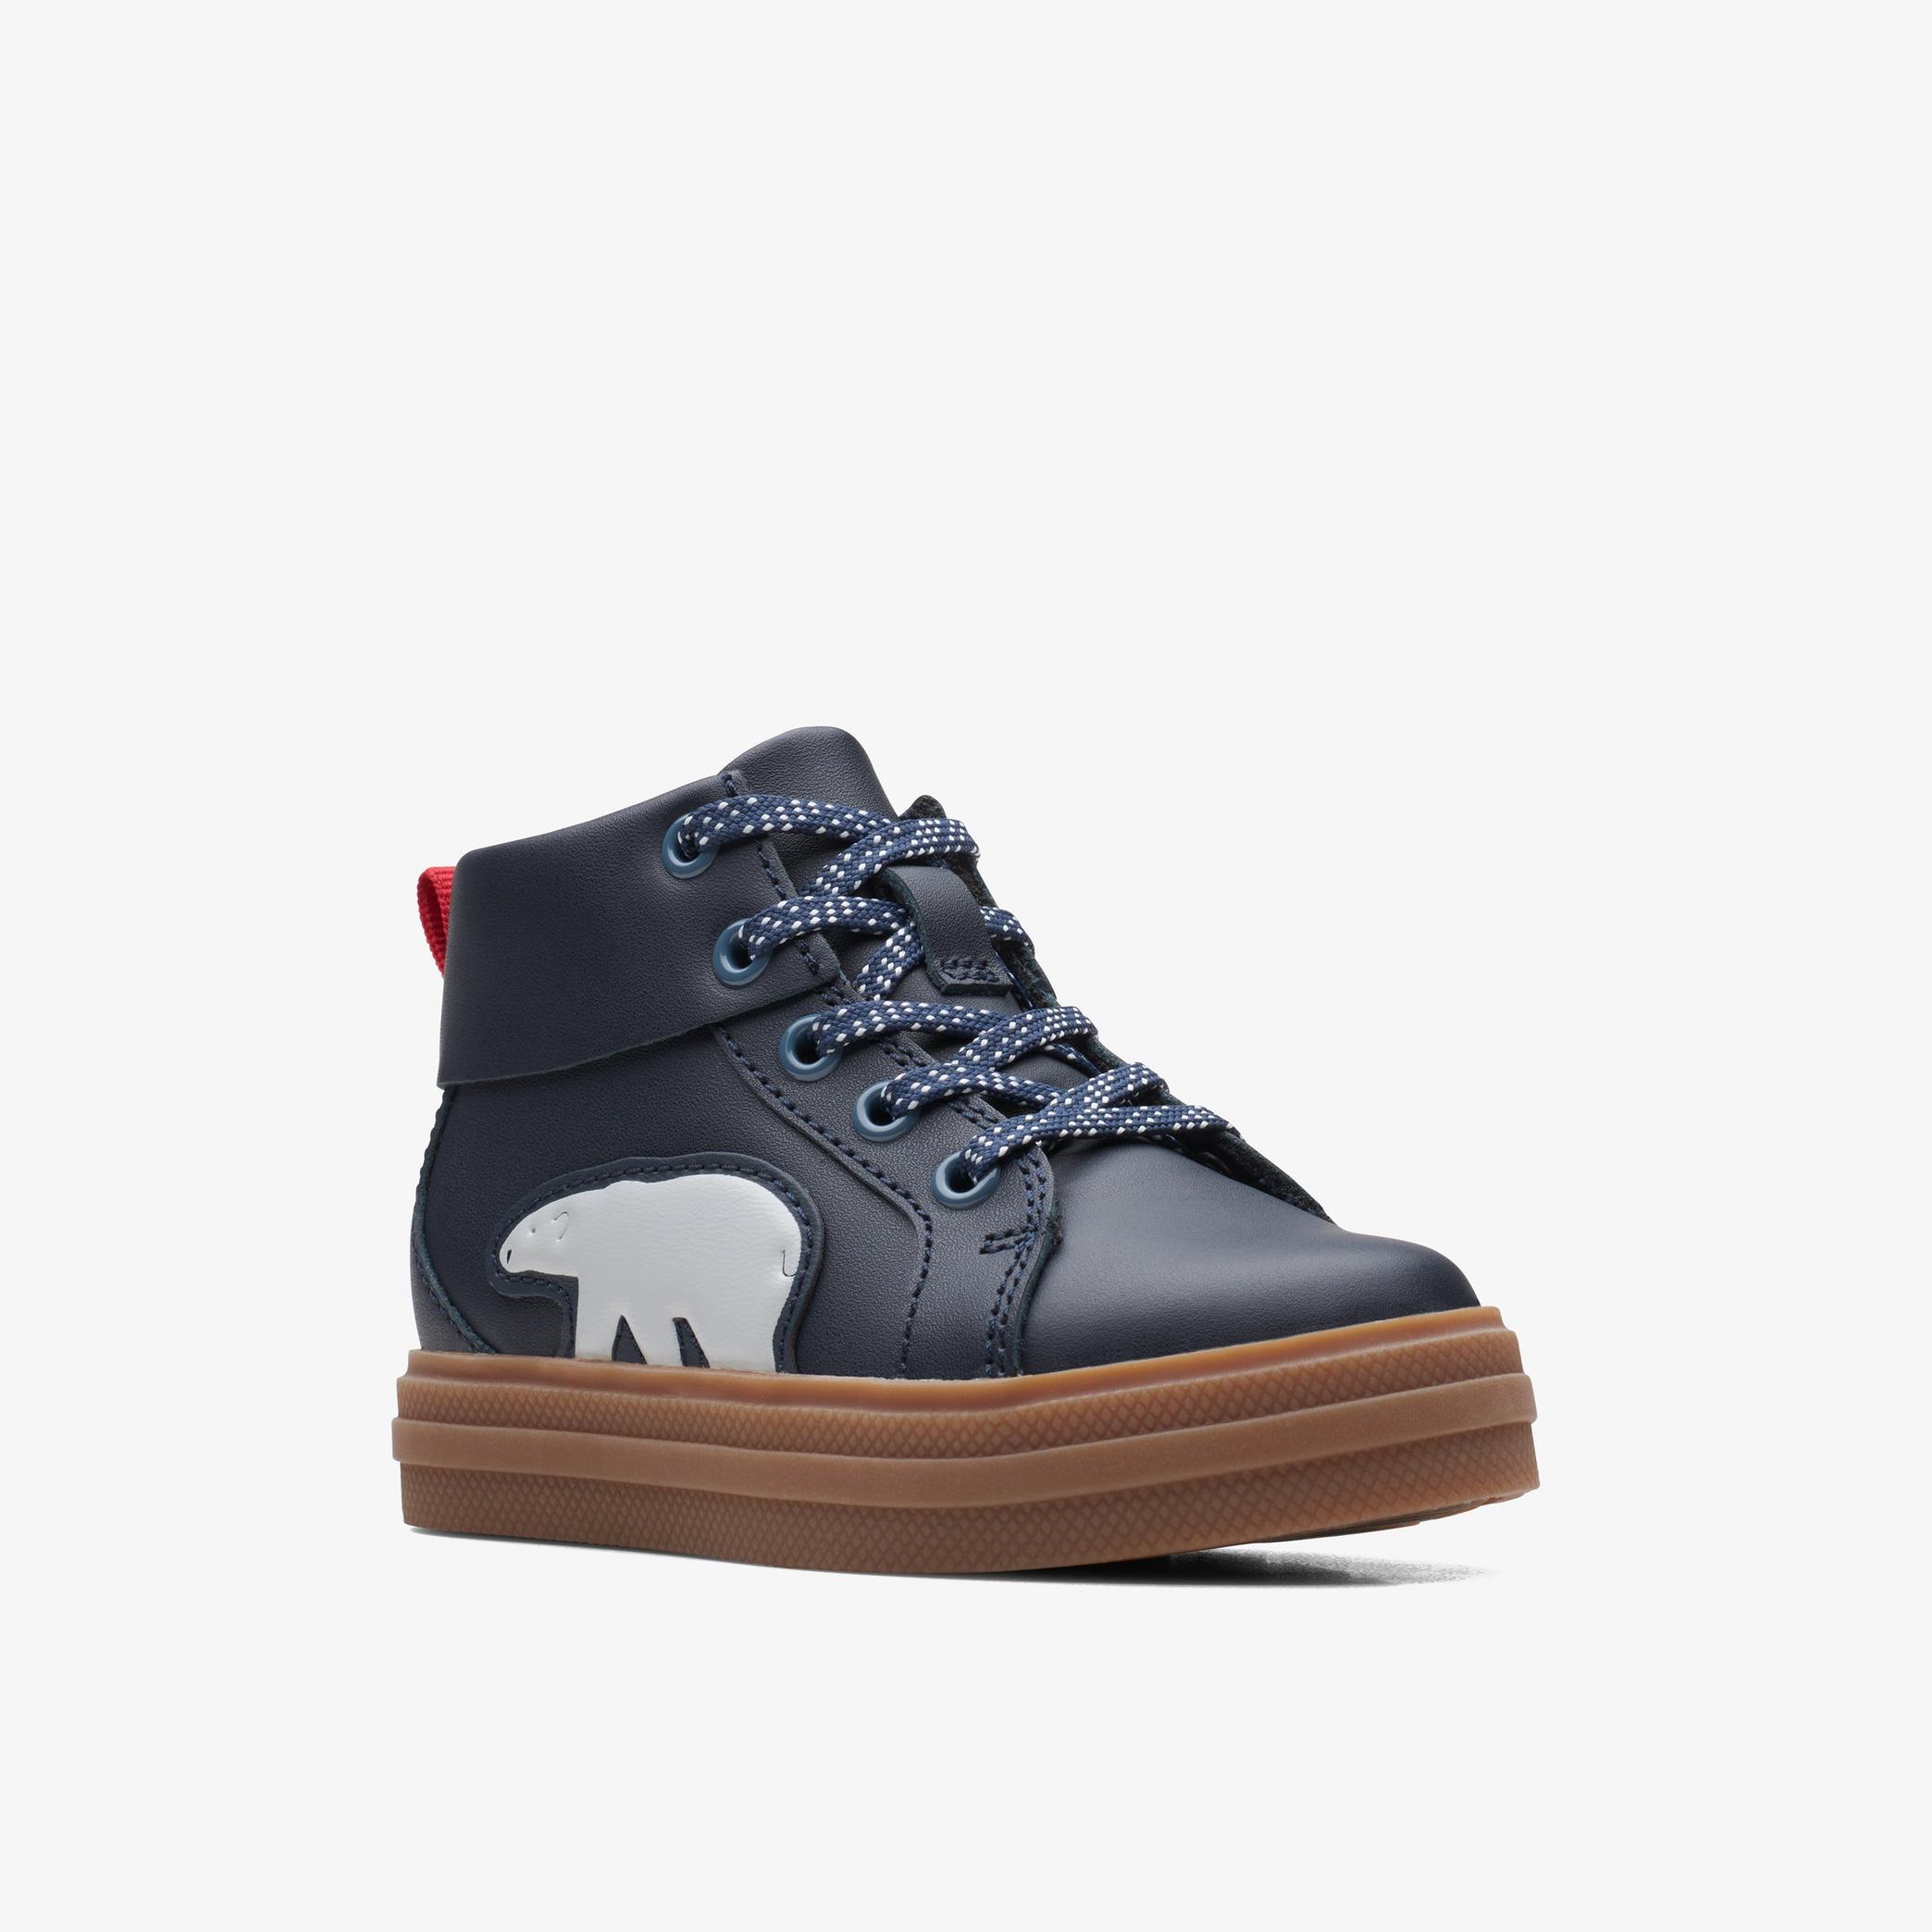 Nova City Toddler Navy Combination Ankle Boots, view 3 of 6